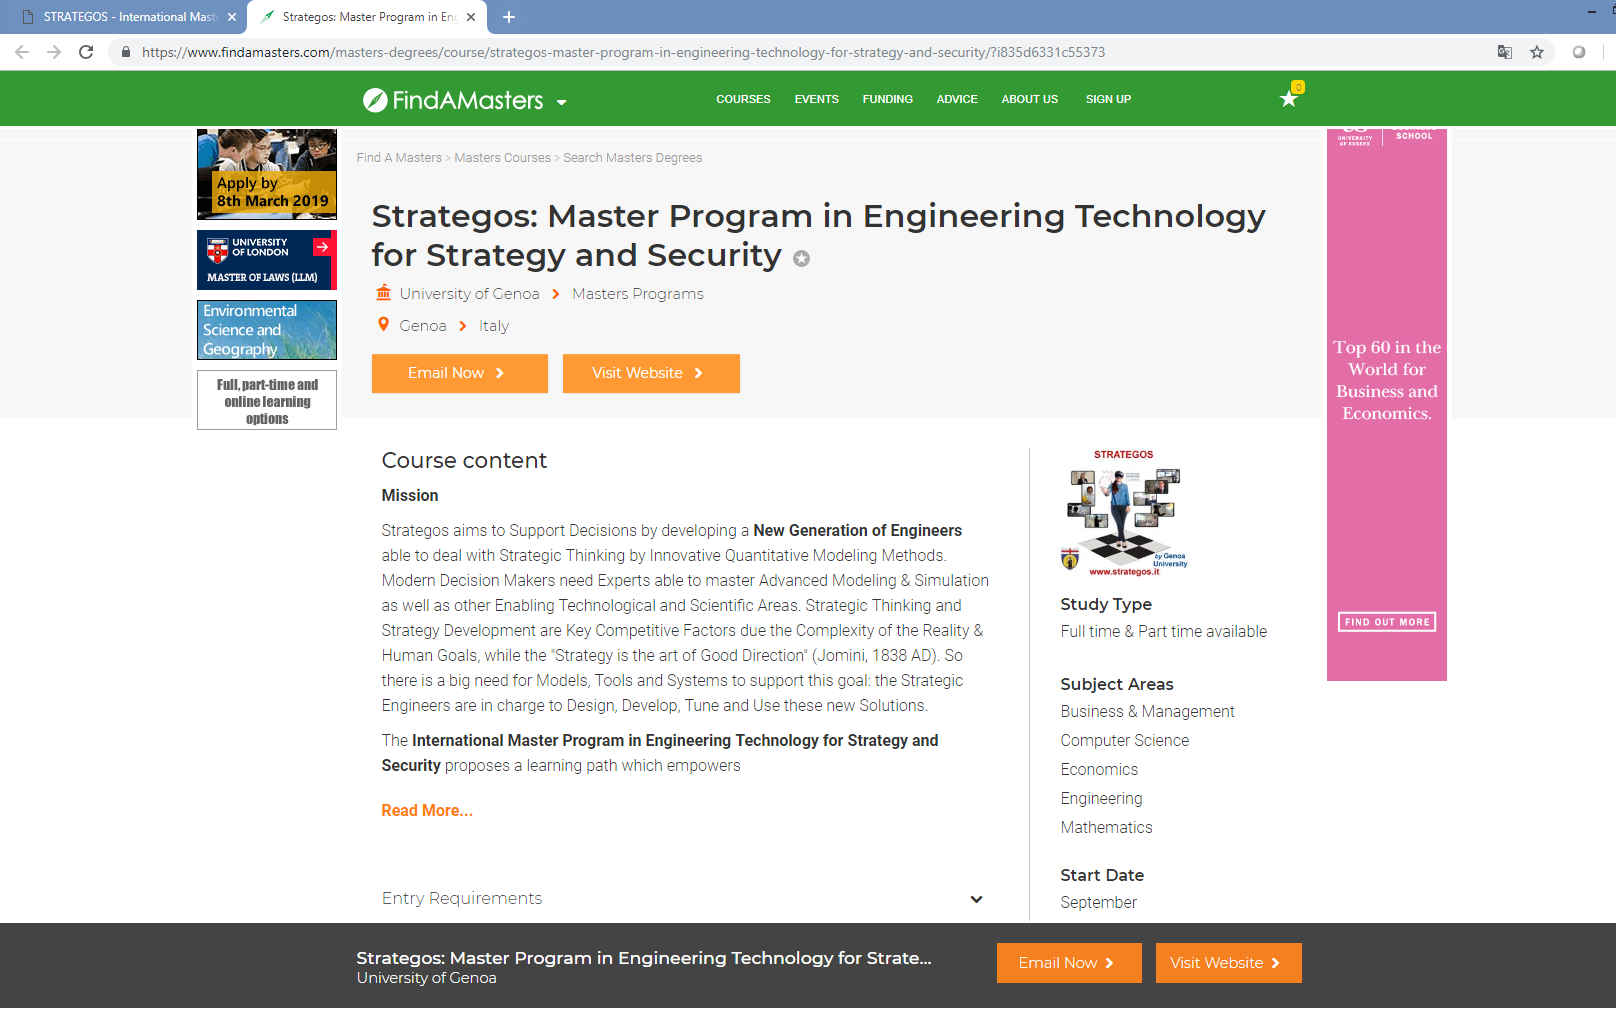 @Find Master: Strategos aims to Support Decisions by developing a New Generation of Engineers able to deal with Strategic Thinking by Innovative Quantitative Modeling Methods